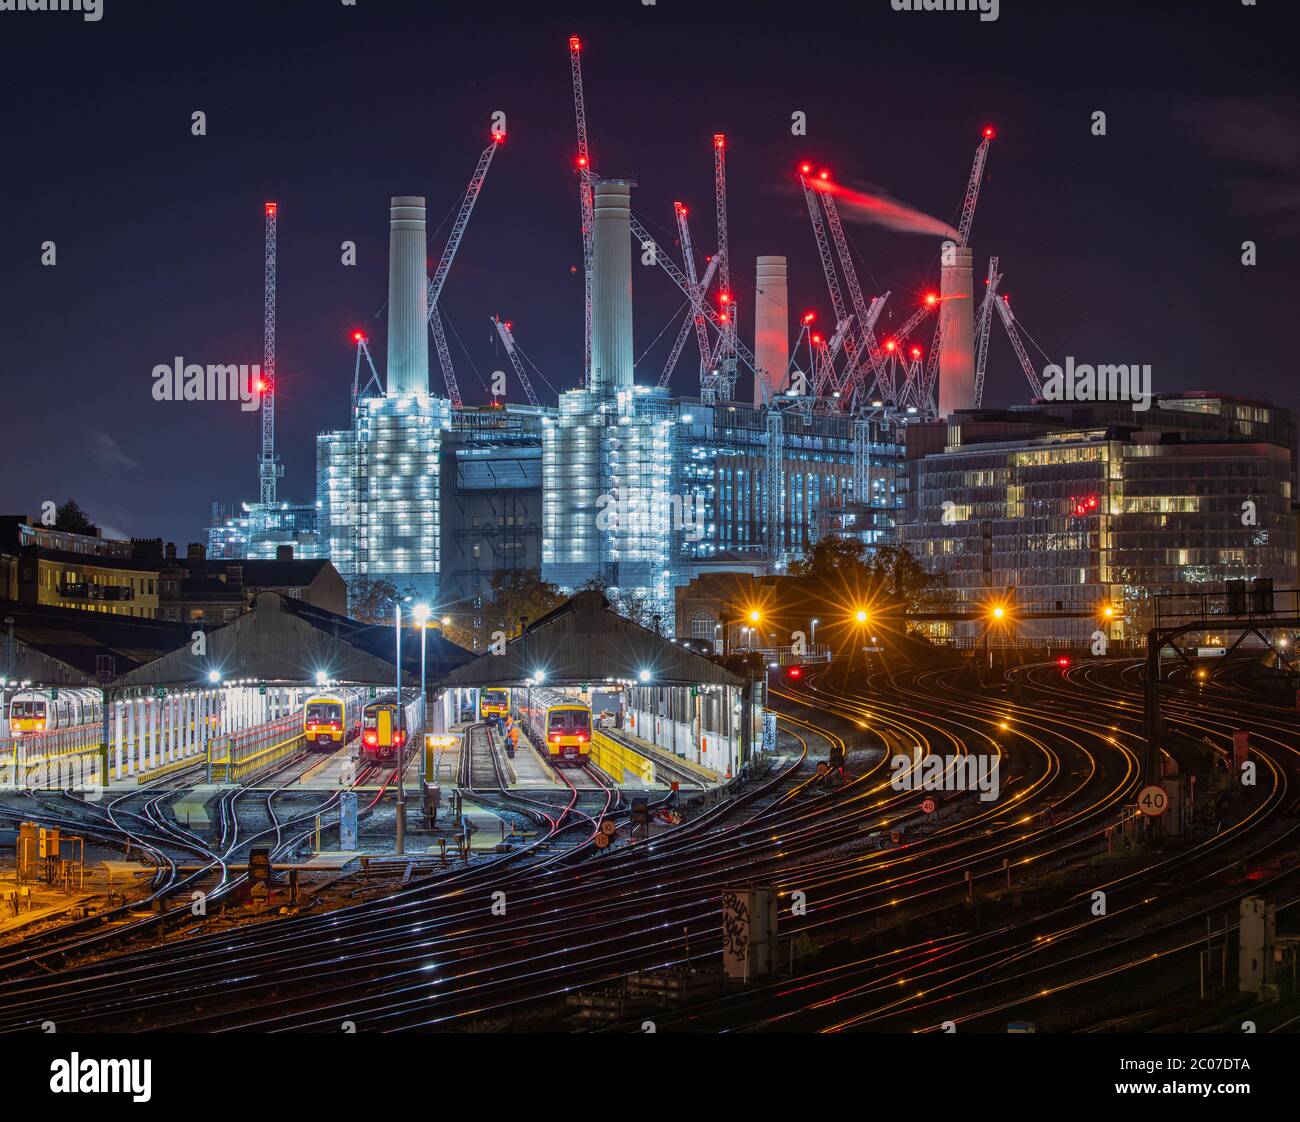 Battersea Power station under construction at night. Stock Photo